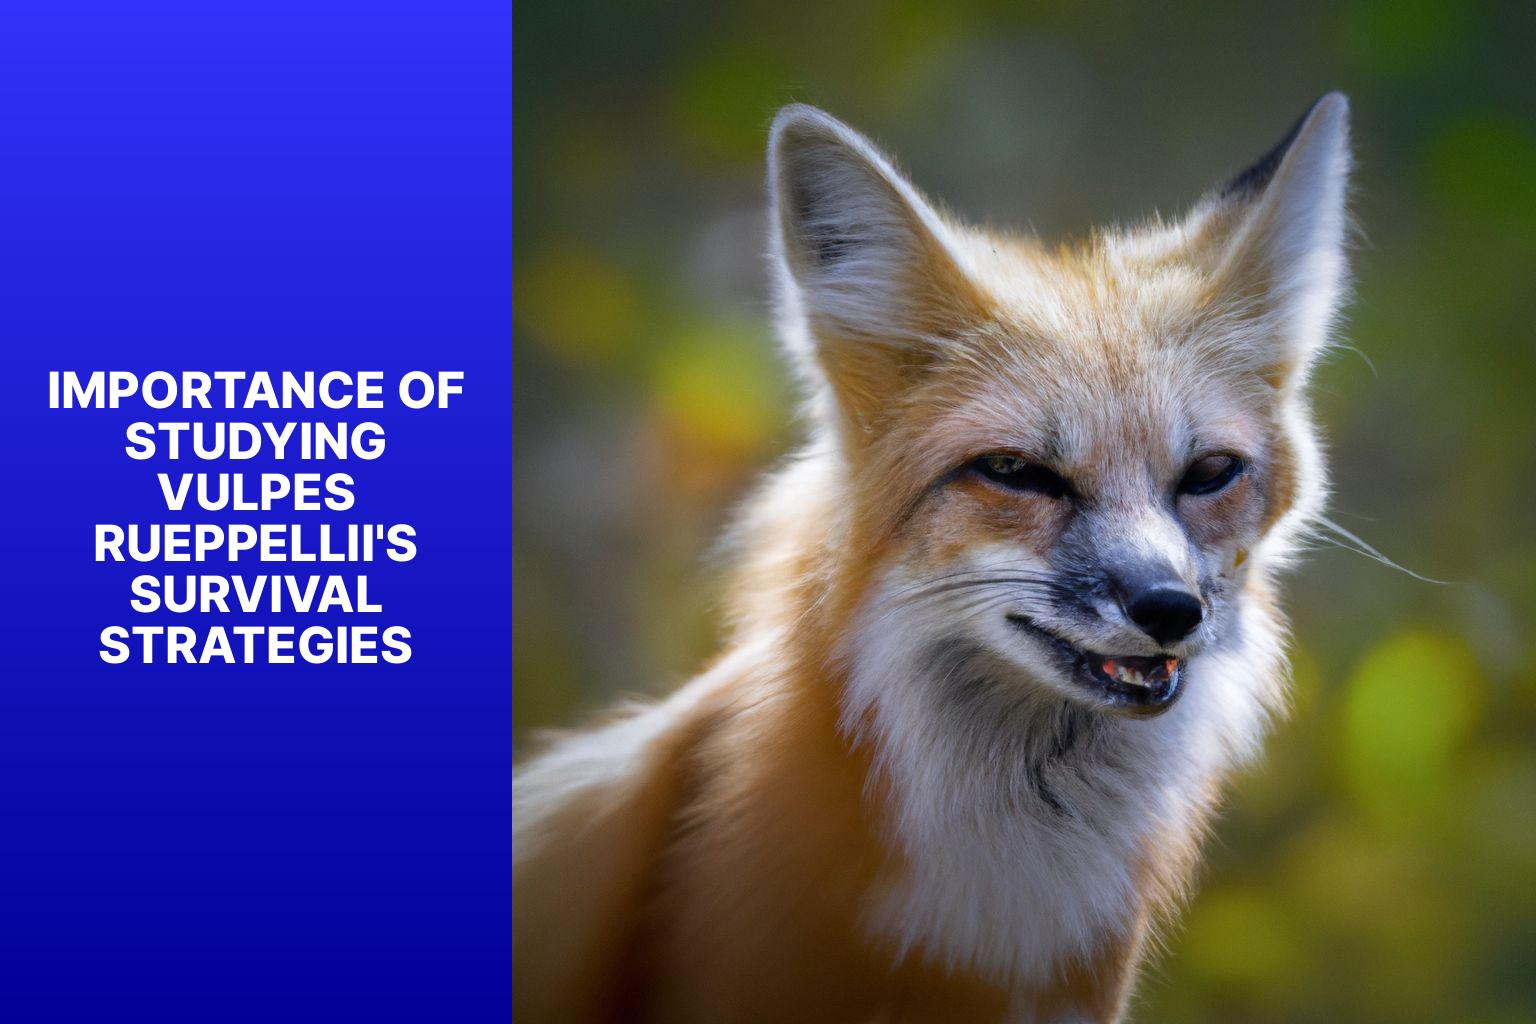 Importance of Studying Vulpes rueppellii